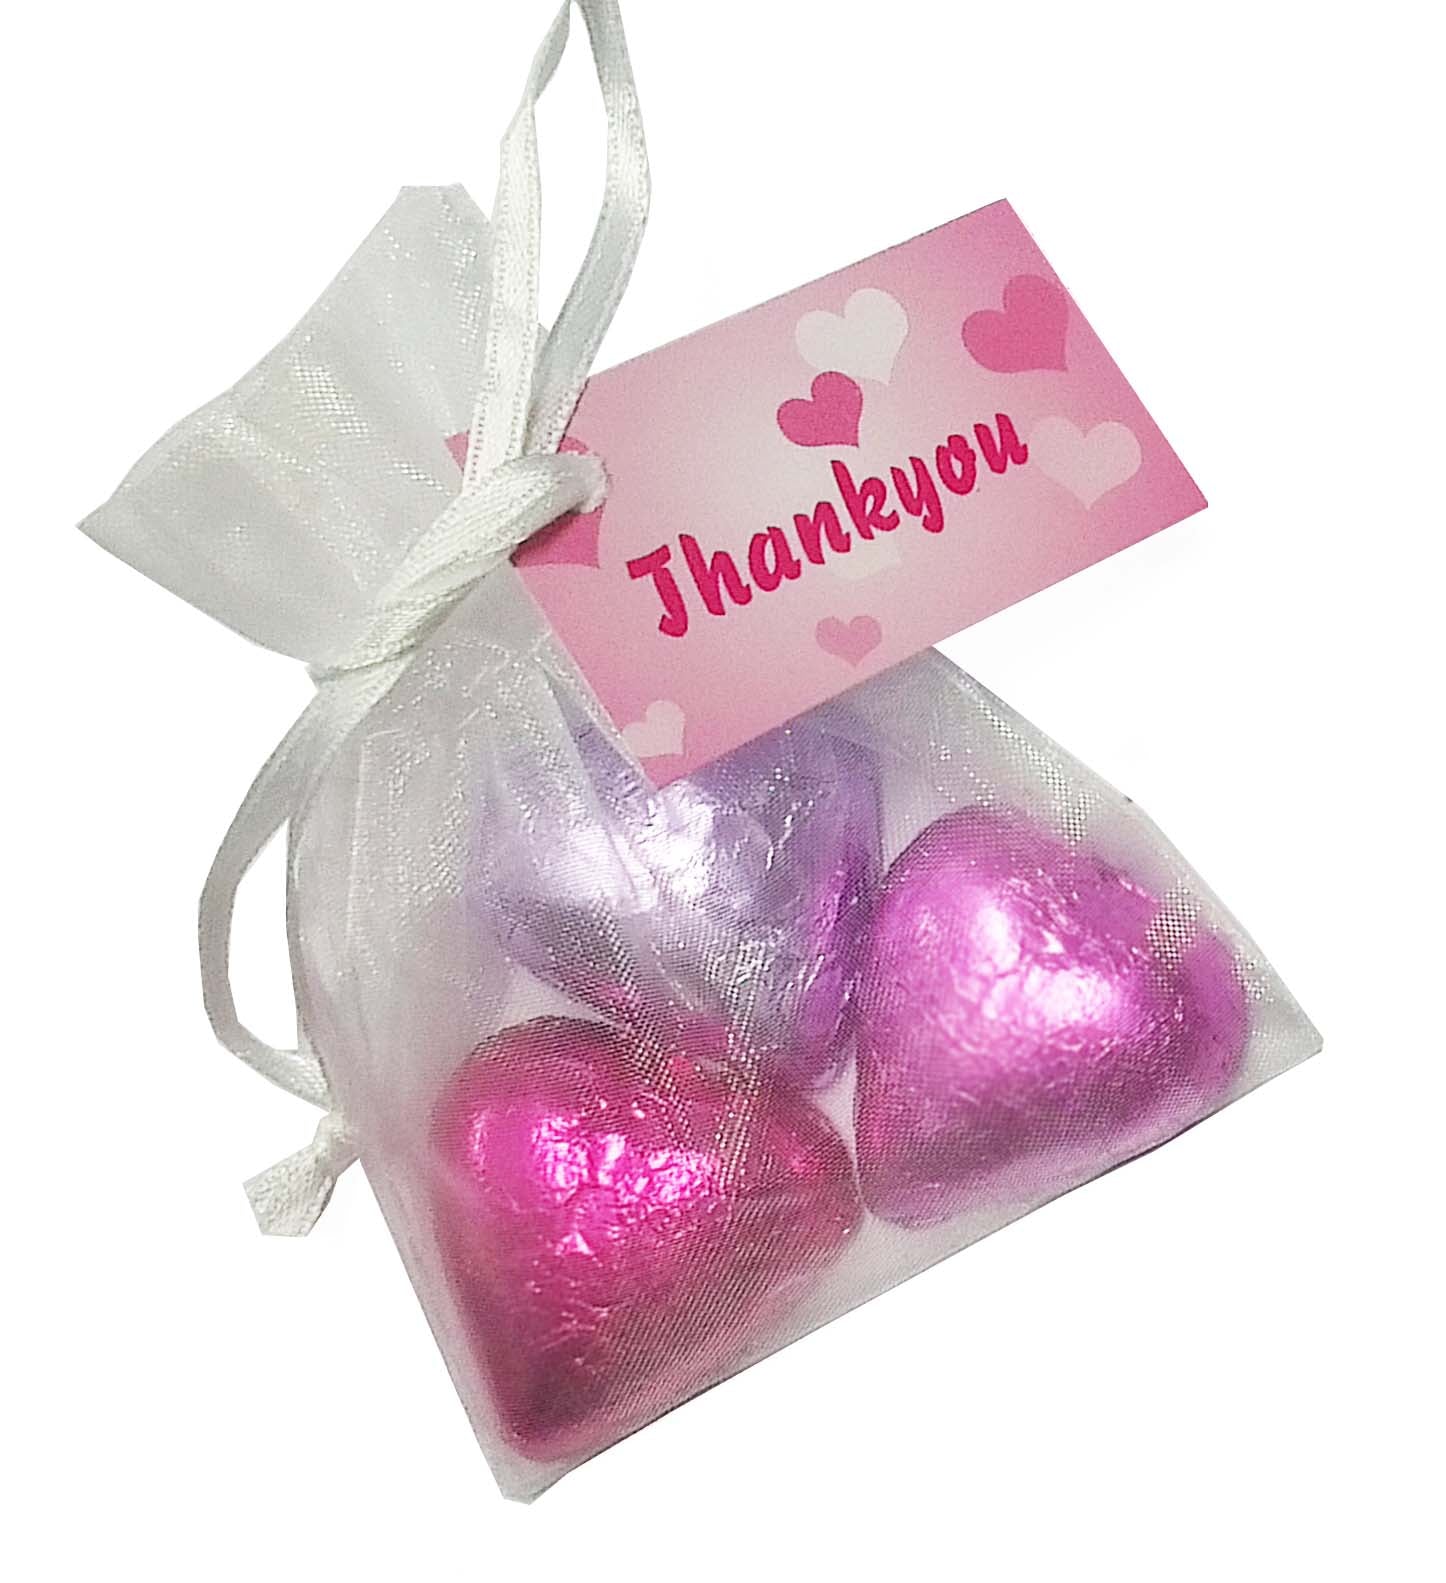 Organza Bags Gift with Chocolate Hearts